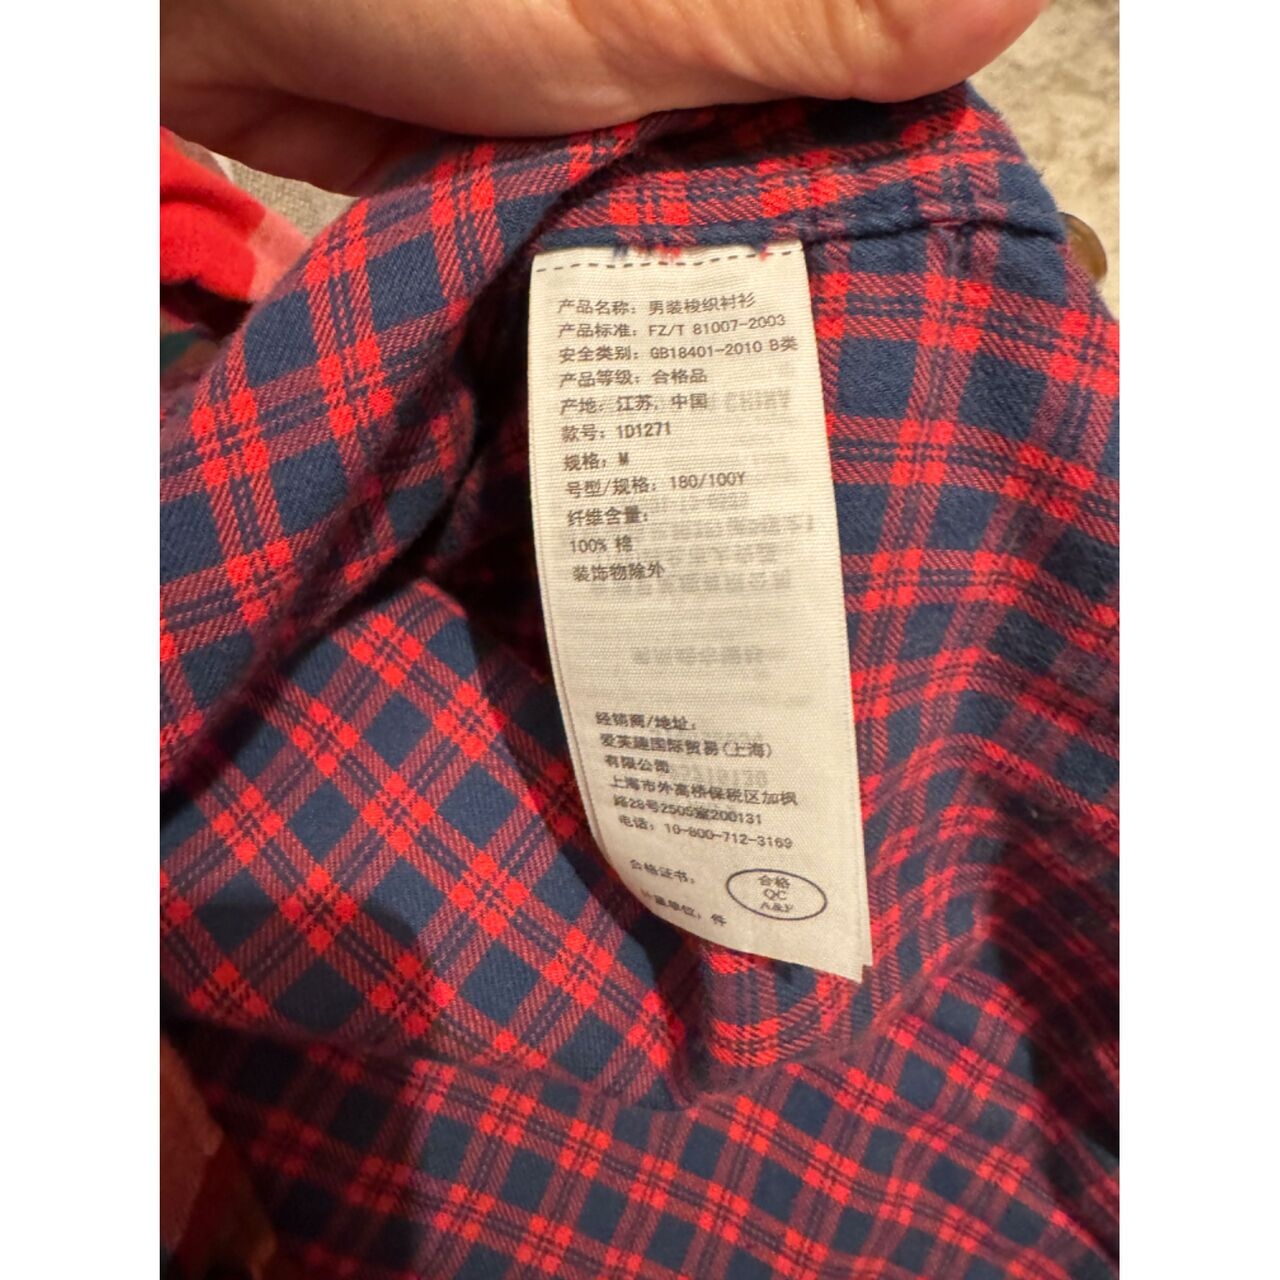 Abercrombie & Fitch Red Plaid Shirt